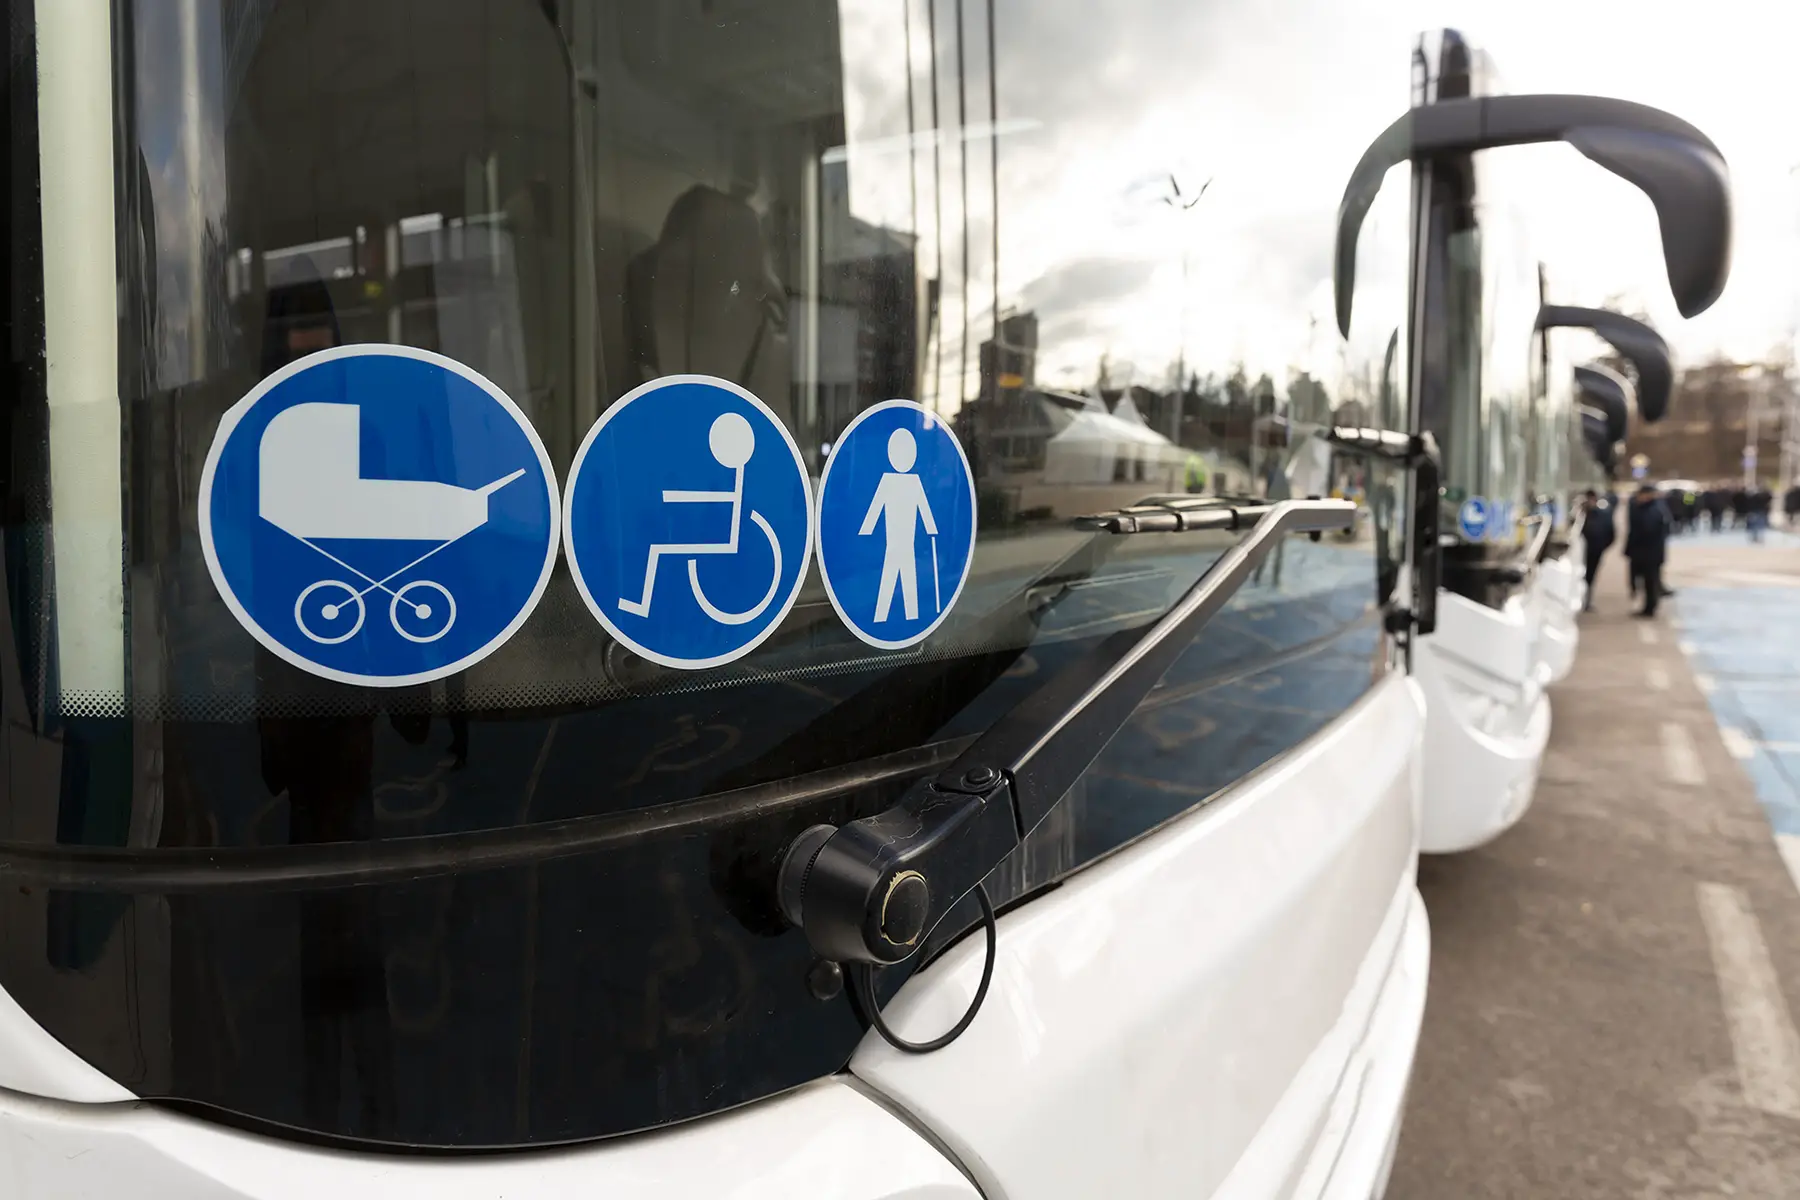 Stickers in the window of a French bus indicating the accessibility features